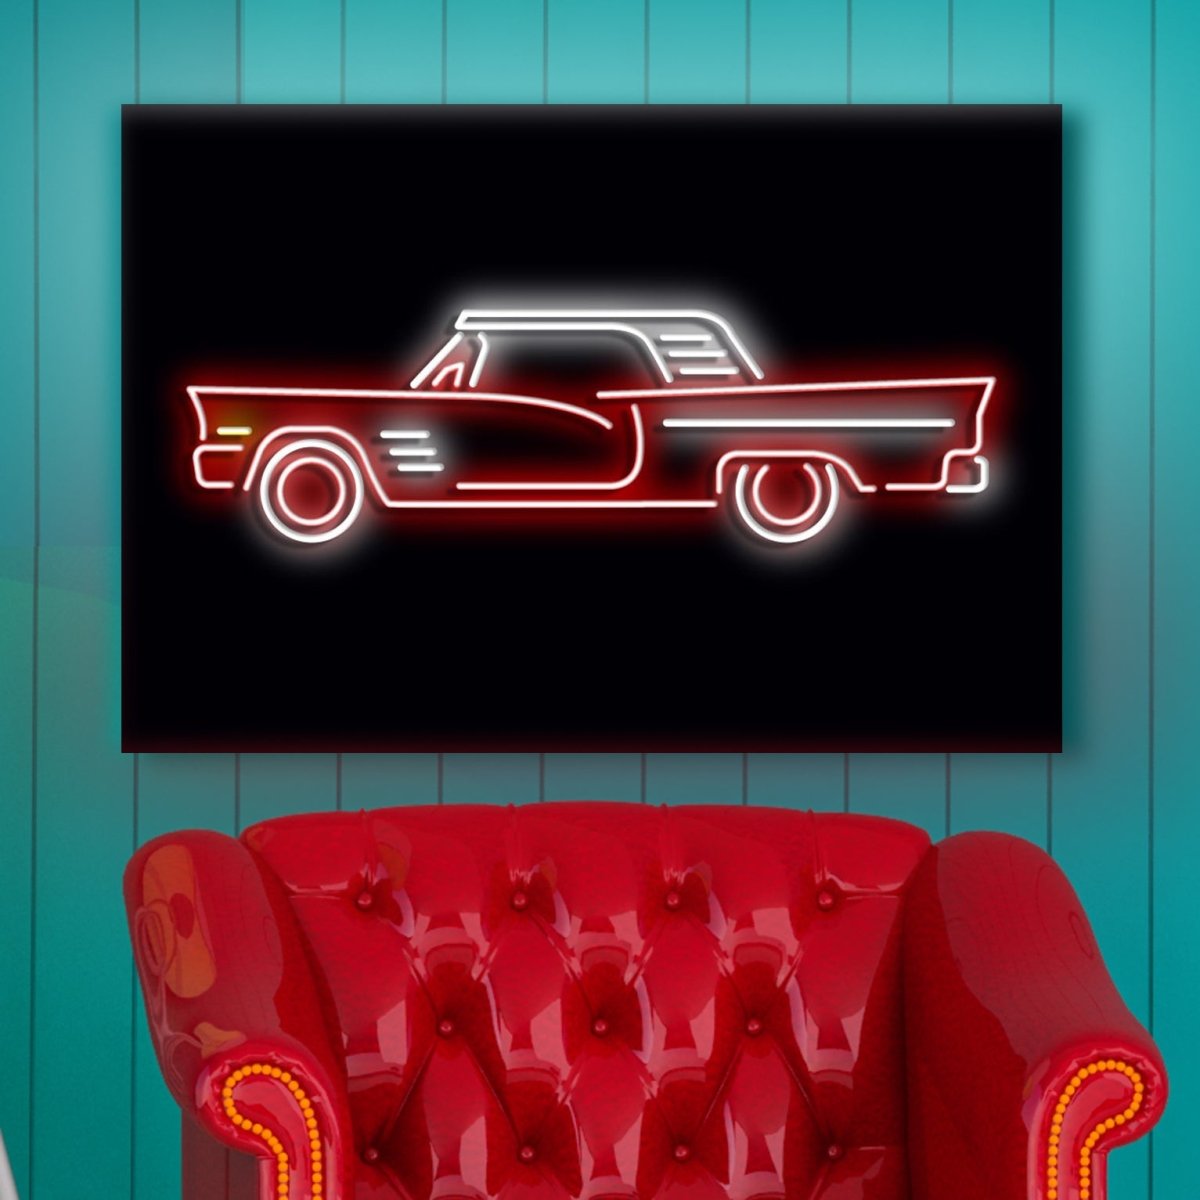 Personalised LED Neon Sign CAR 3 - madaboutneon